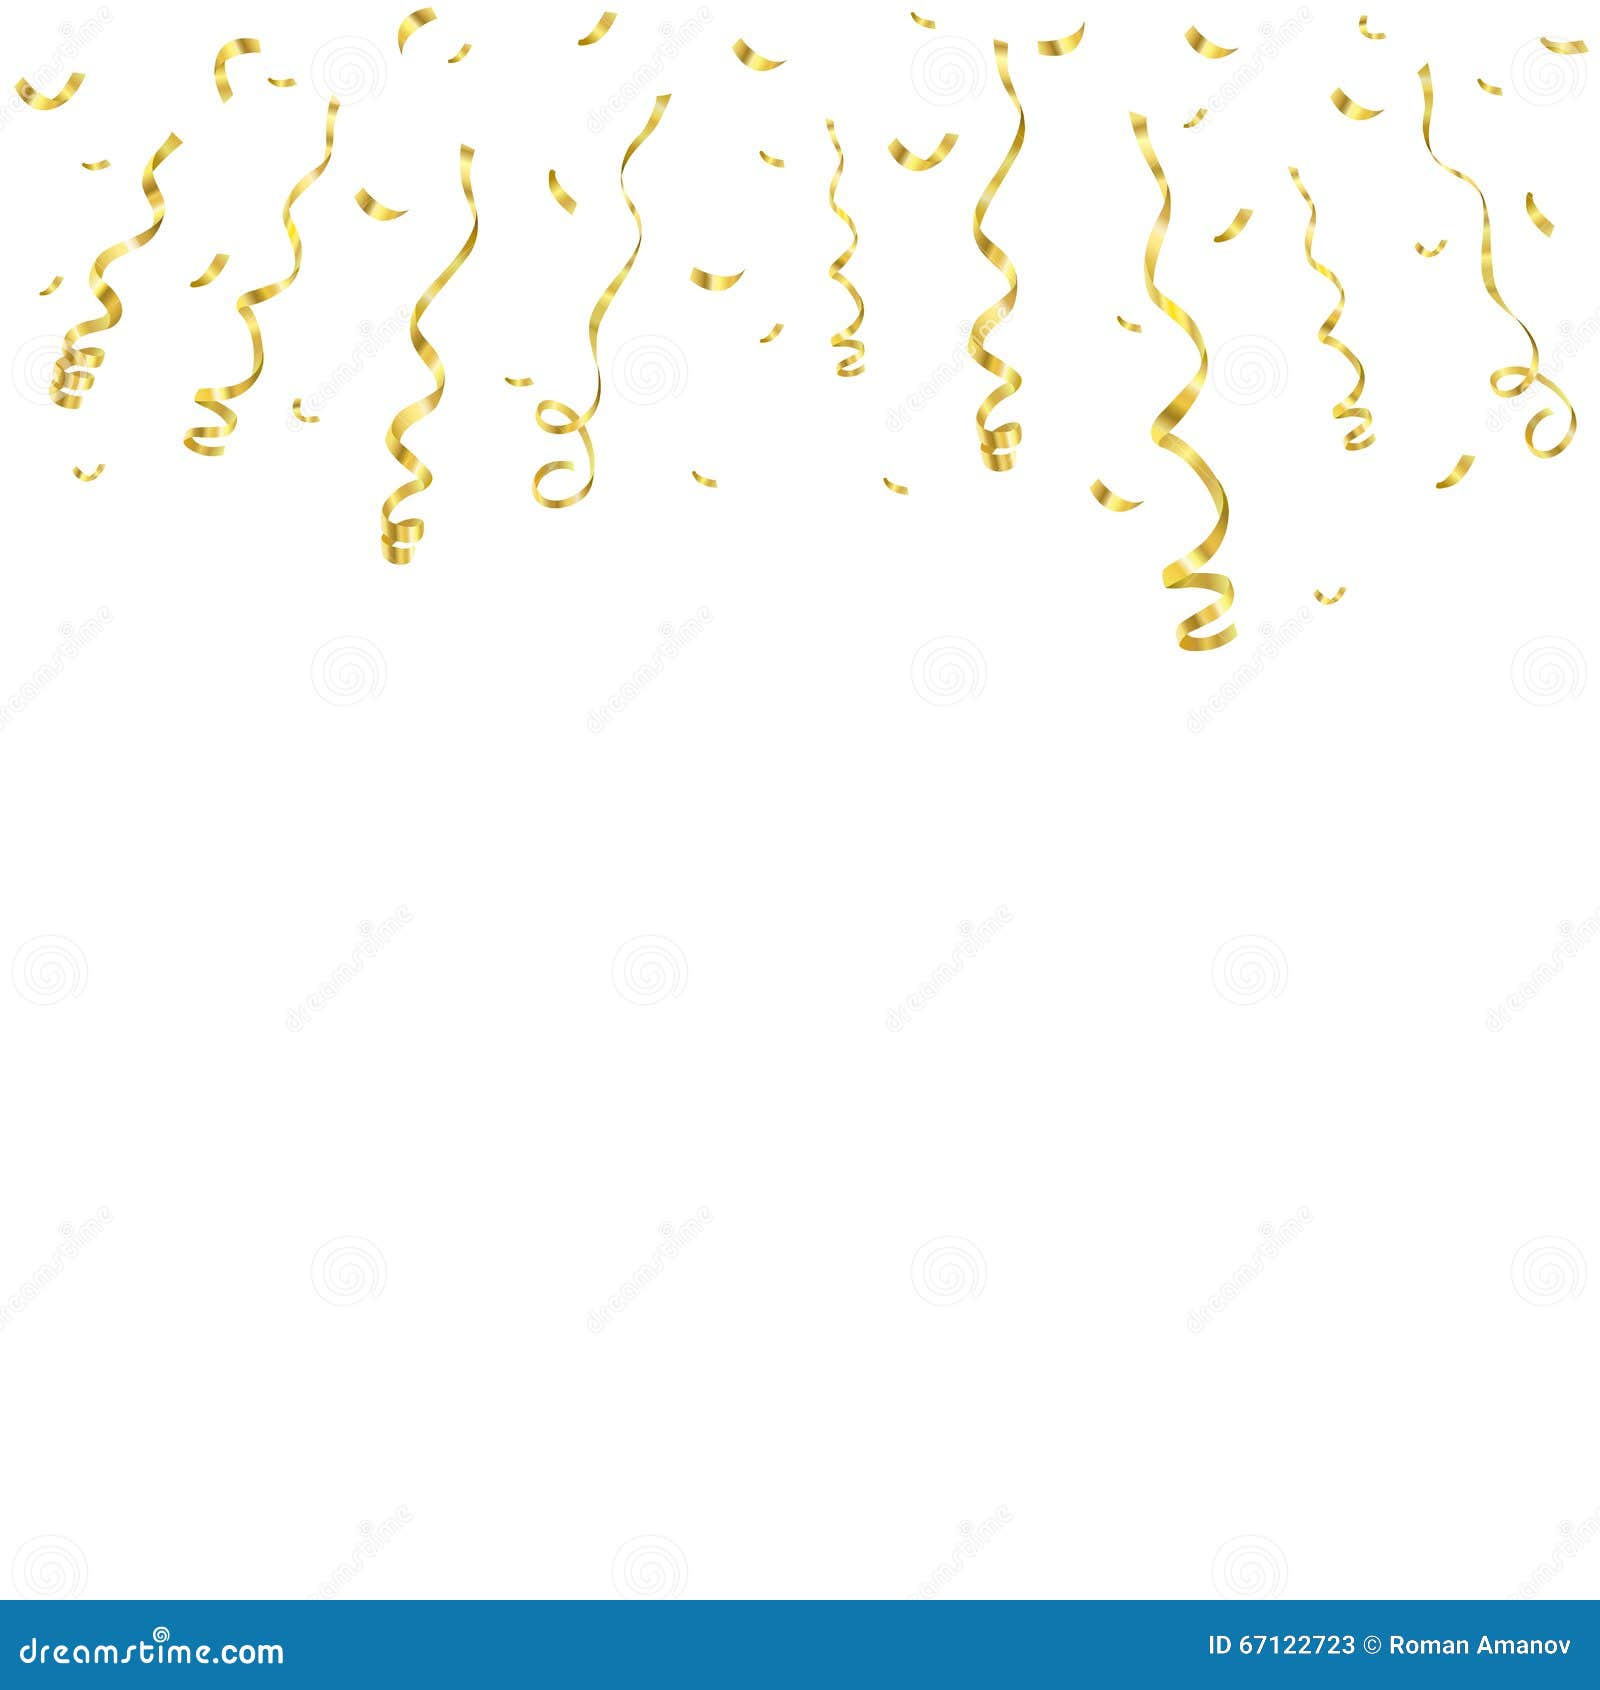 Celebration Background Template with Confetti and Golden Ribbons. Vector  Illustration Stock Illustration - Illustration of greeting, decoration:  67122723